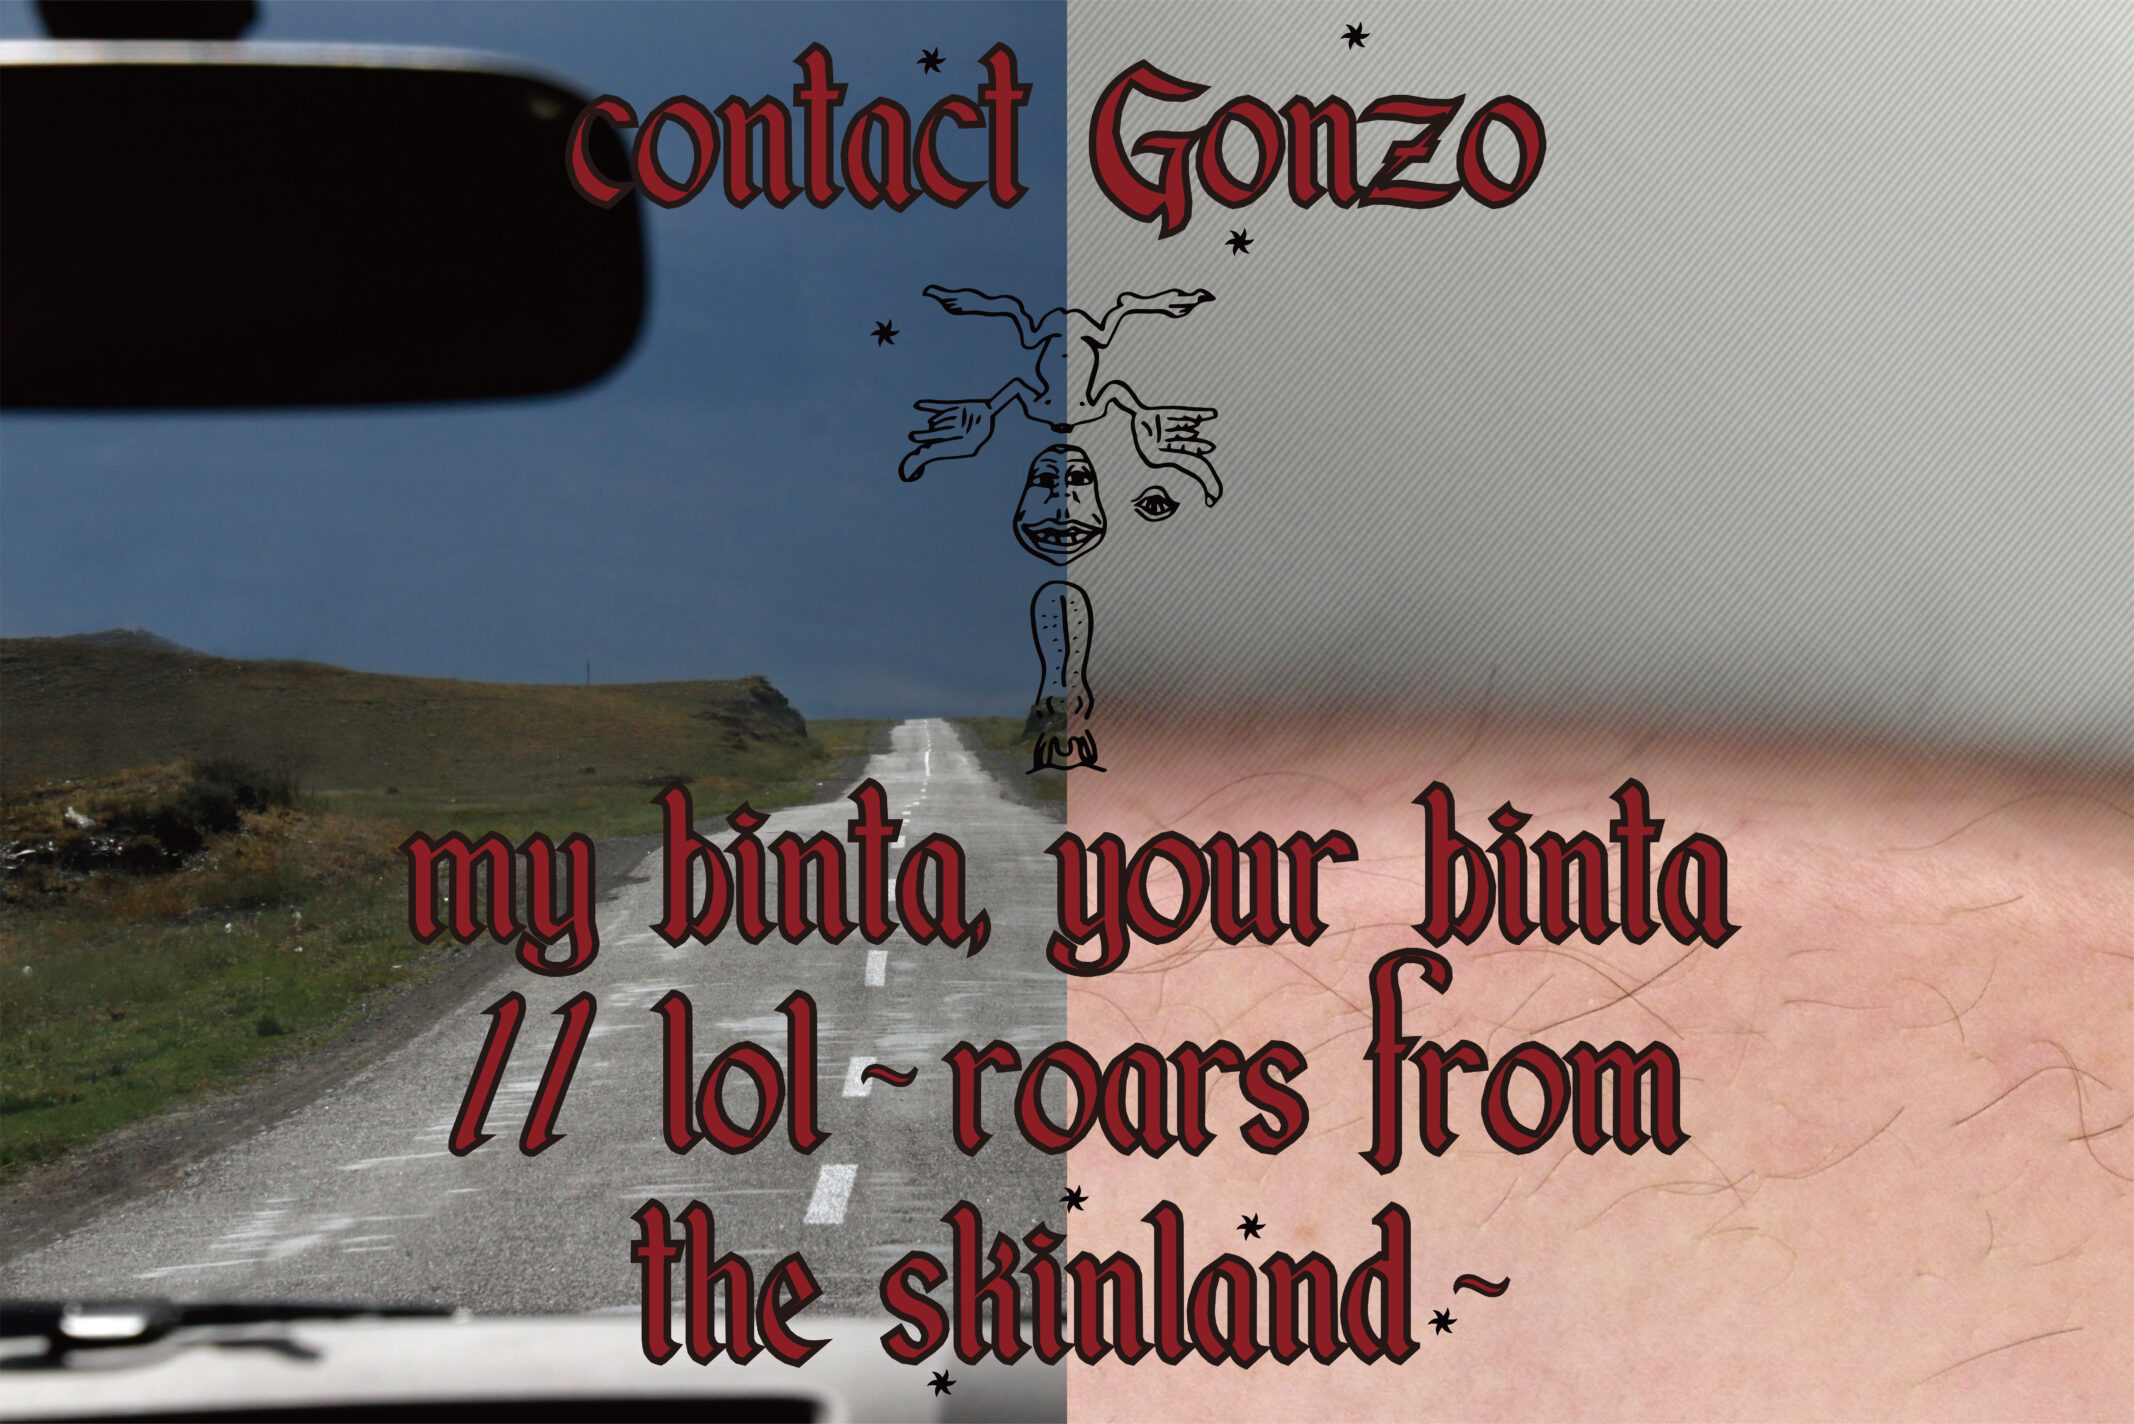 Performance stage by contact Gonzo “my binta, your binta // lol ~ roars from the skinland ~”